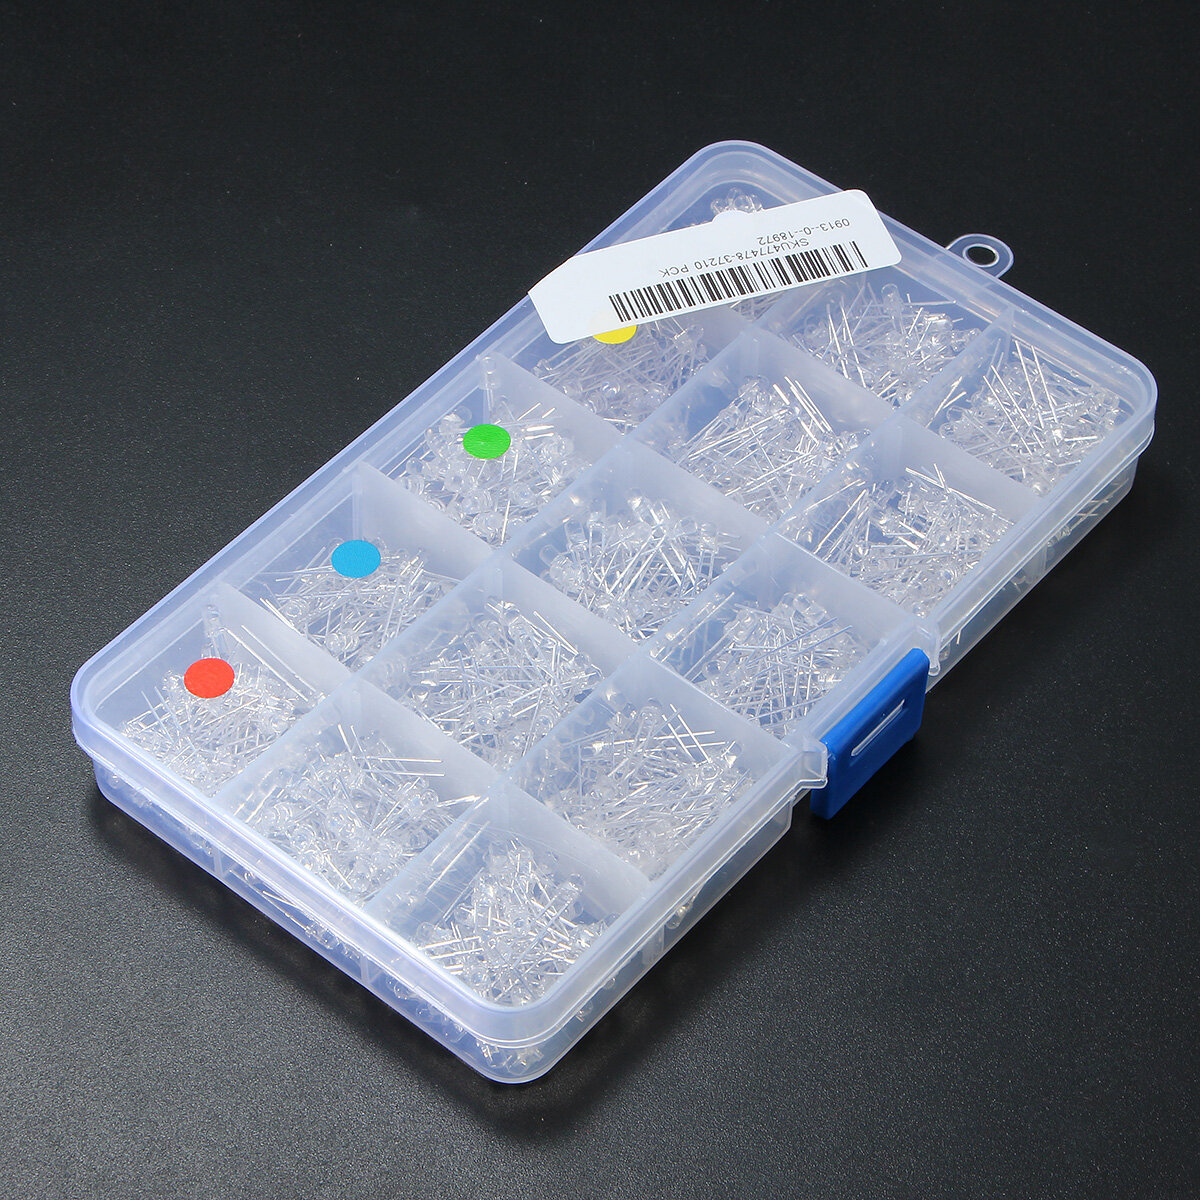 best price,750pcs,3mm,led,light,yellow,red,blue,green,white,diodes,discount